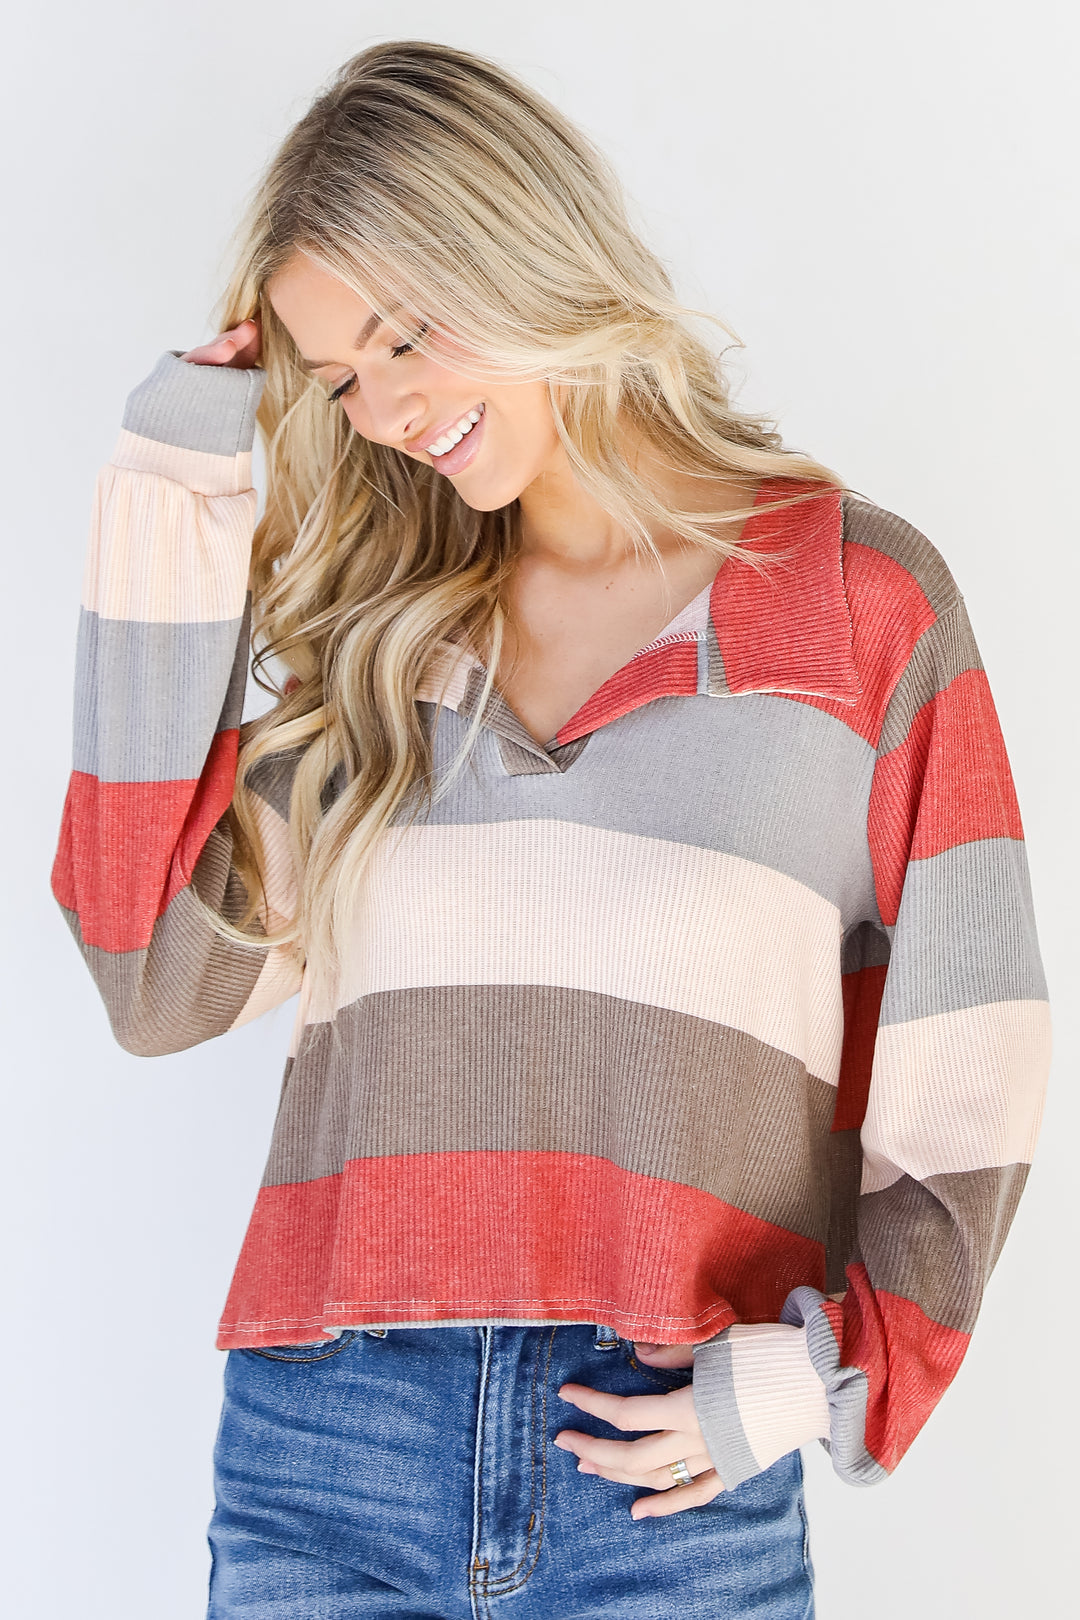 Striped Collared Top